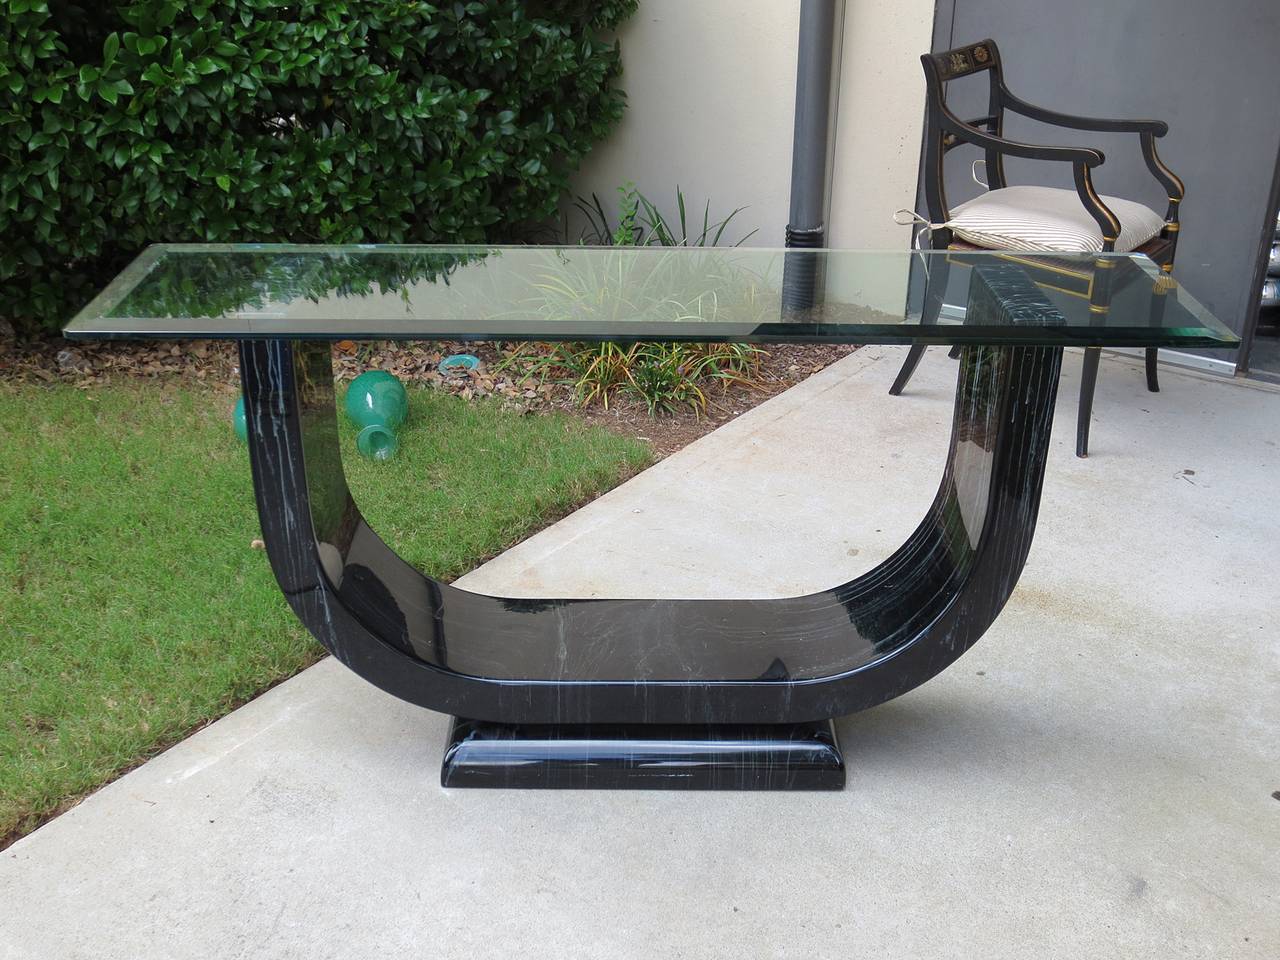 Mid-20th century faux marble console in the style of Karl Springer, glass top
Mid-20th century Italian faux marble console with glass top, attributed to Karl Springer
with label 'Made in Italy'
Glass has a beveled edge
The console's material is